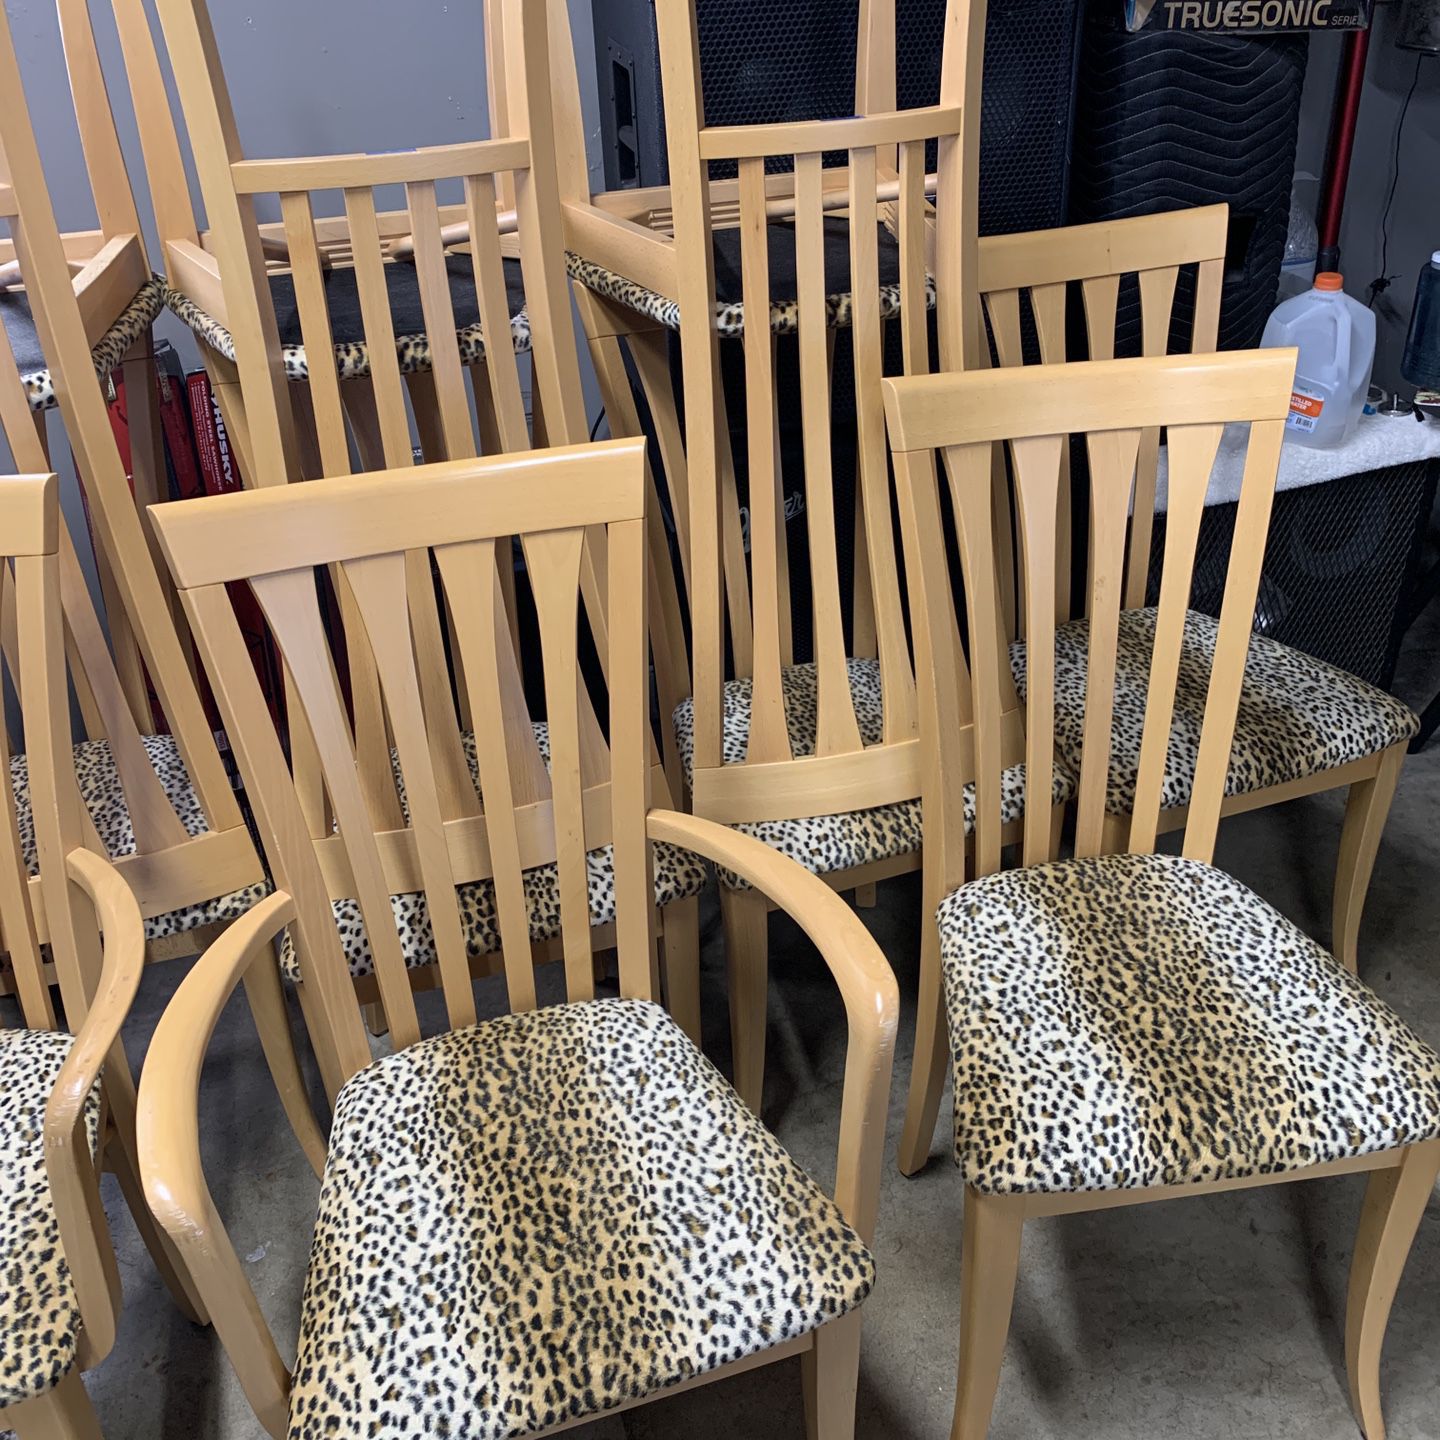 10 Chairs $80 …Best Offer!